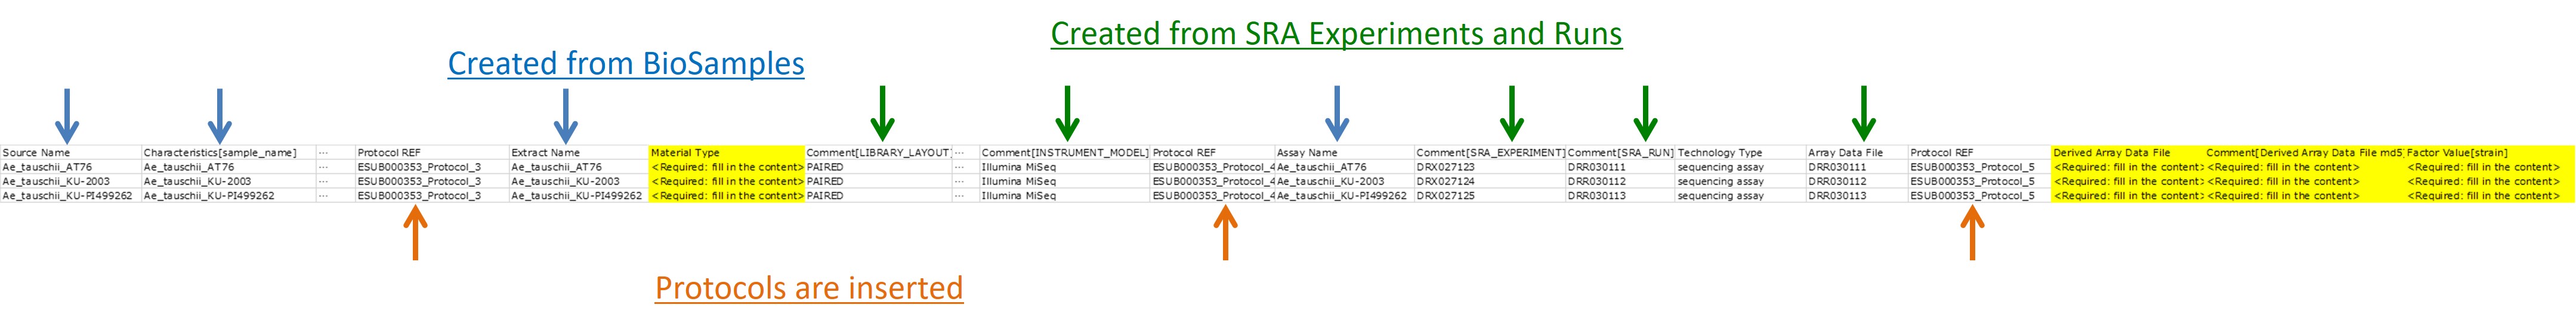 SDRF template, yellow-highlighted fields need to be filled by submitter